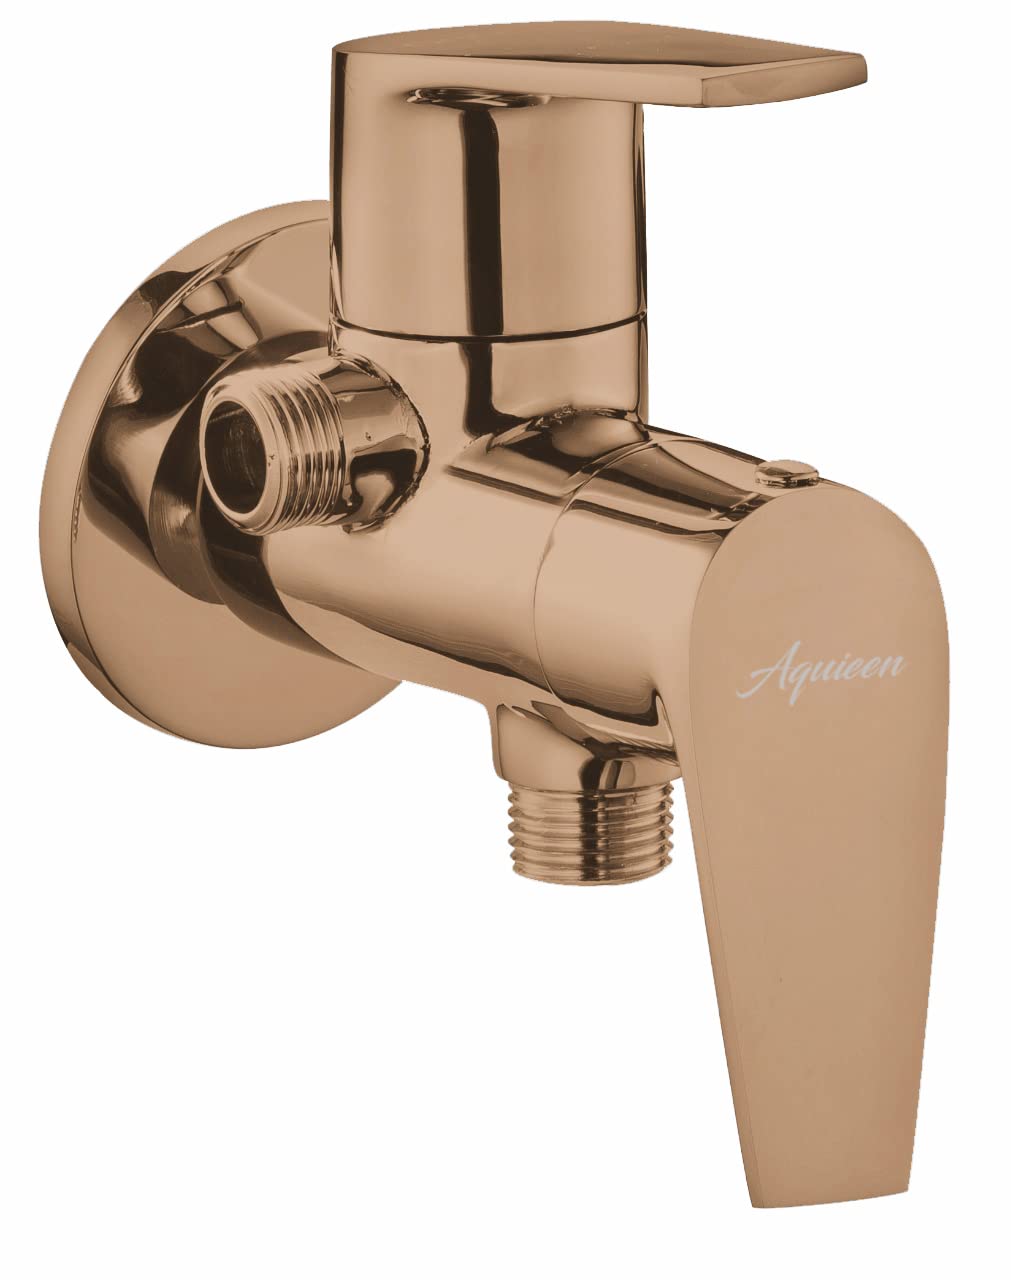 Aquieen Entice Brass Luxury Series 2 In 1 Angle Valve With Wall Flange Rose Gold